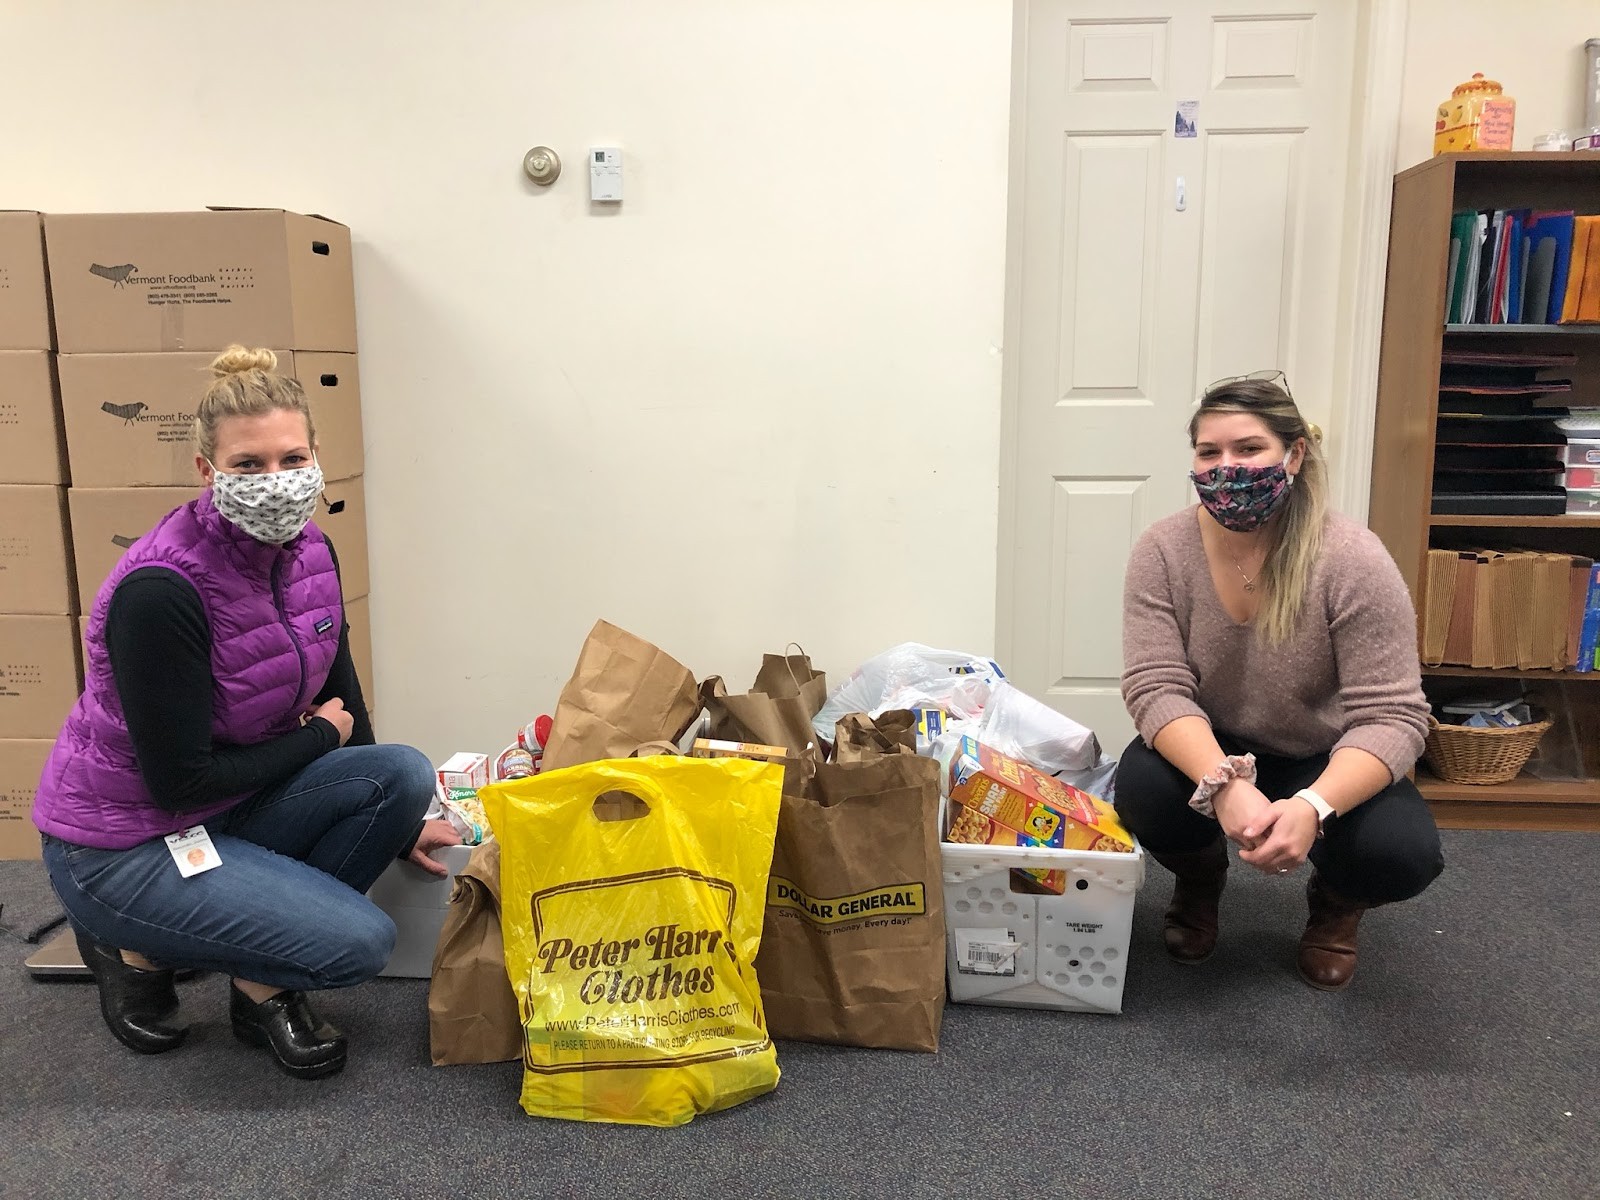 Velco workers with masks on preparing to distribute halloween treats